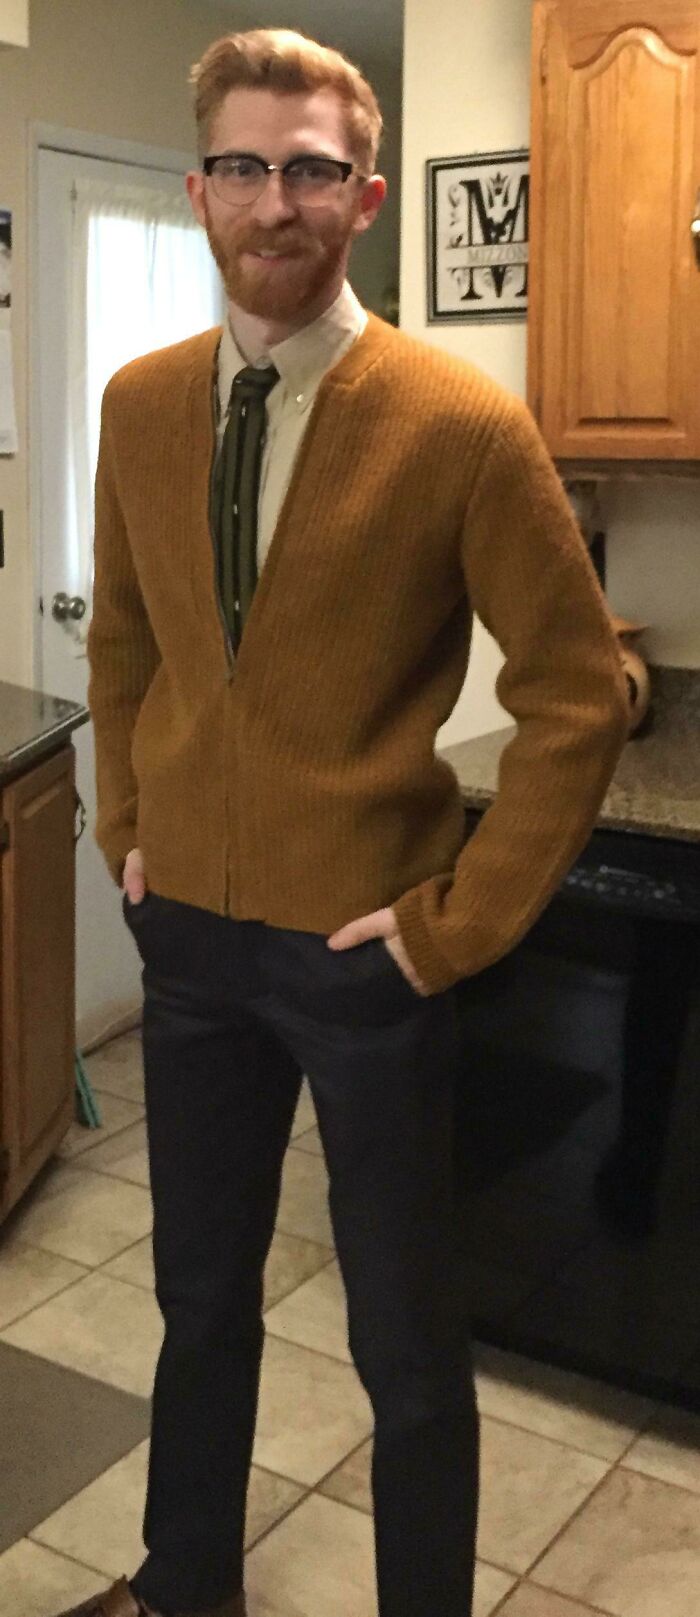 Been Slowly Building My Vintage Wardrobe Through Thrifting. I Try To Stick To Authentic 1950s And 1960s Things, Which Is Turning Out To Be Difficult In The Men's Sections. Here Is Some Of What My Scrawny, Homely Ginger Self Has Mustered Together So Far